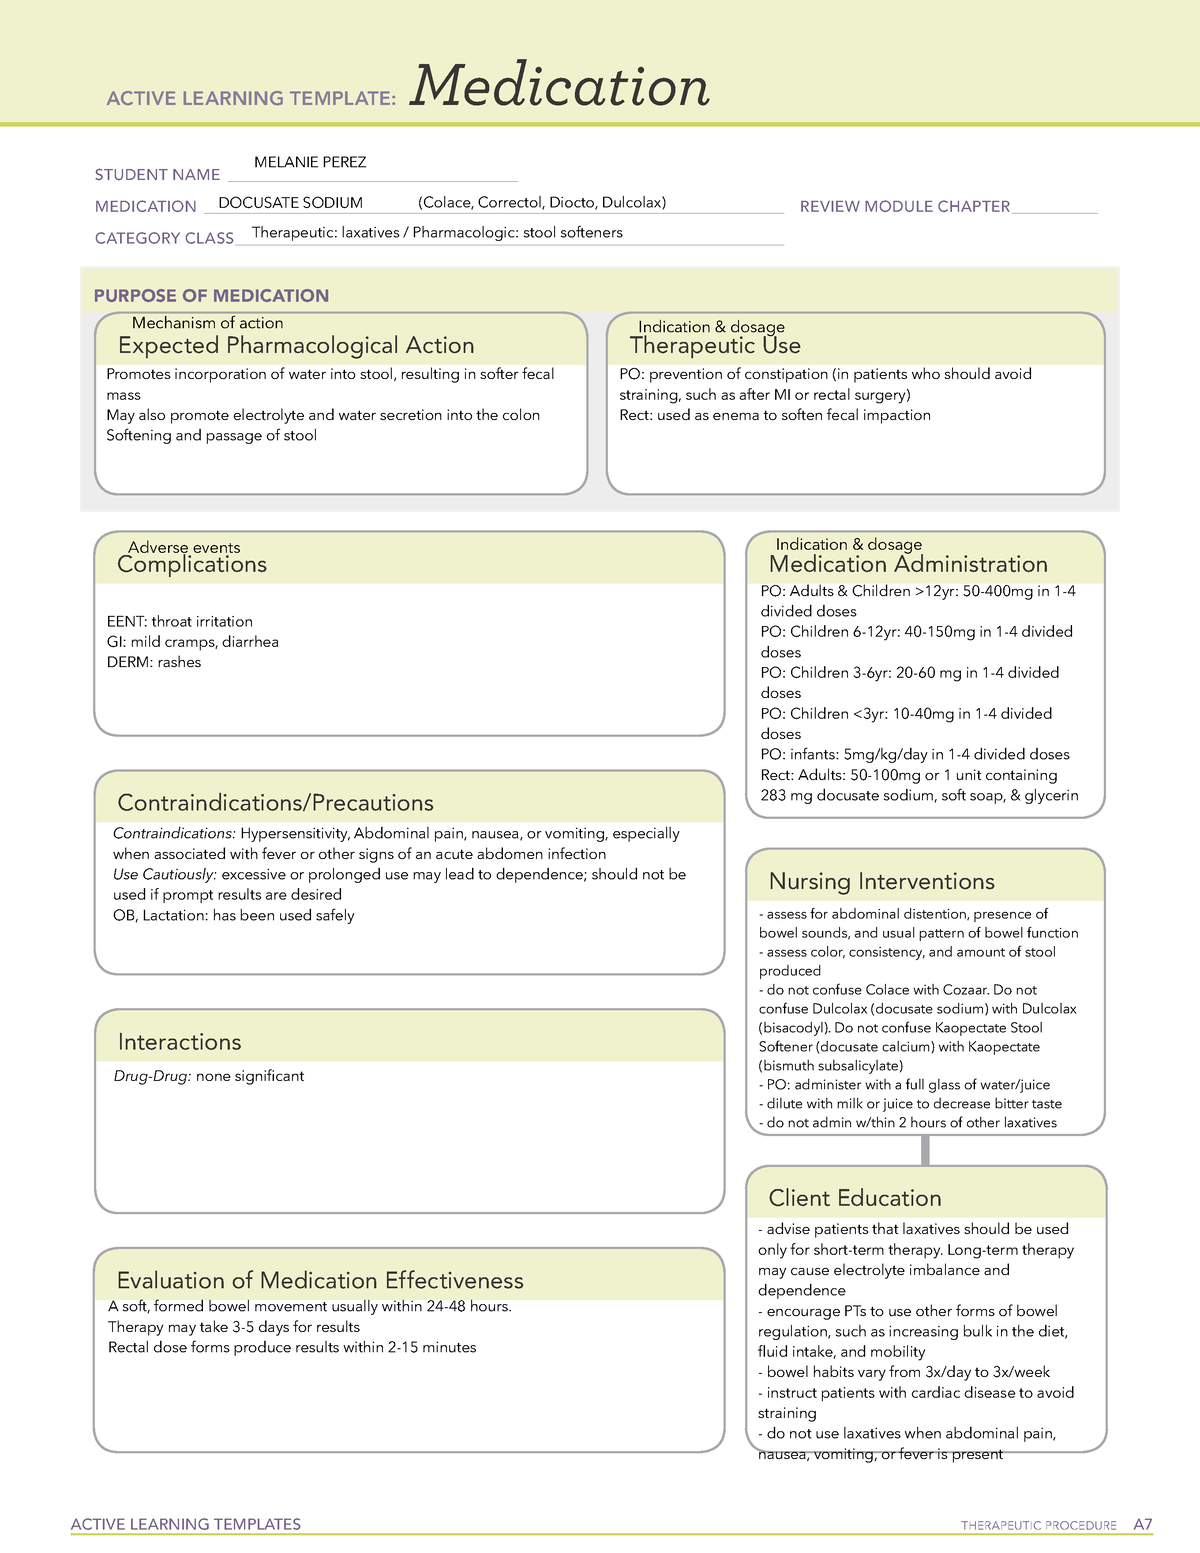 Docusate Sodium Med Card Fundamentals Of Nursing ACTIVE LEARNING TEMPLATES THERAPEUTIC